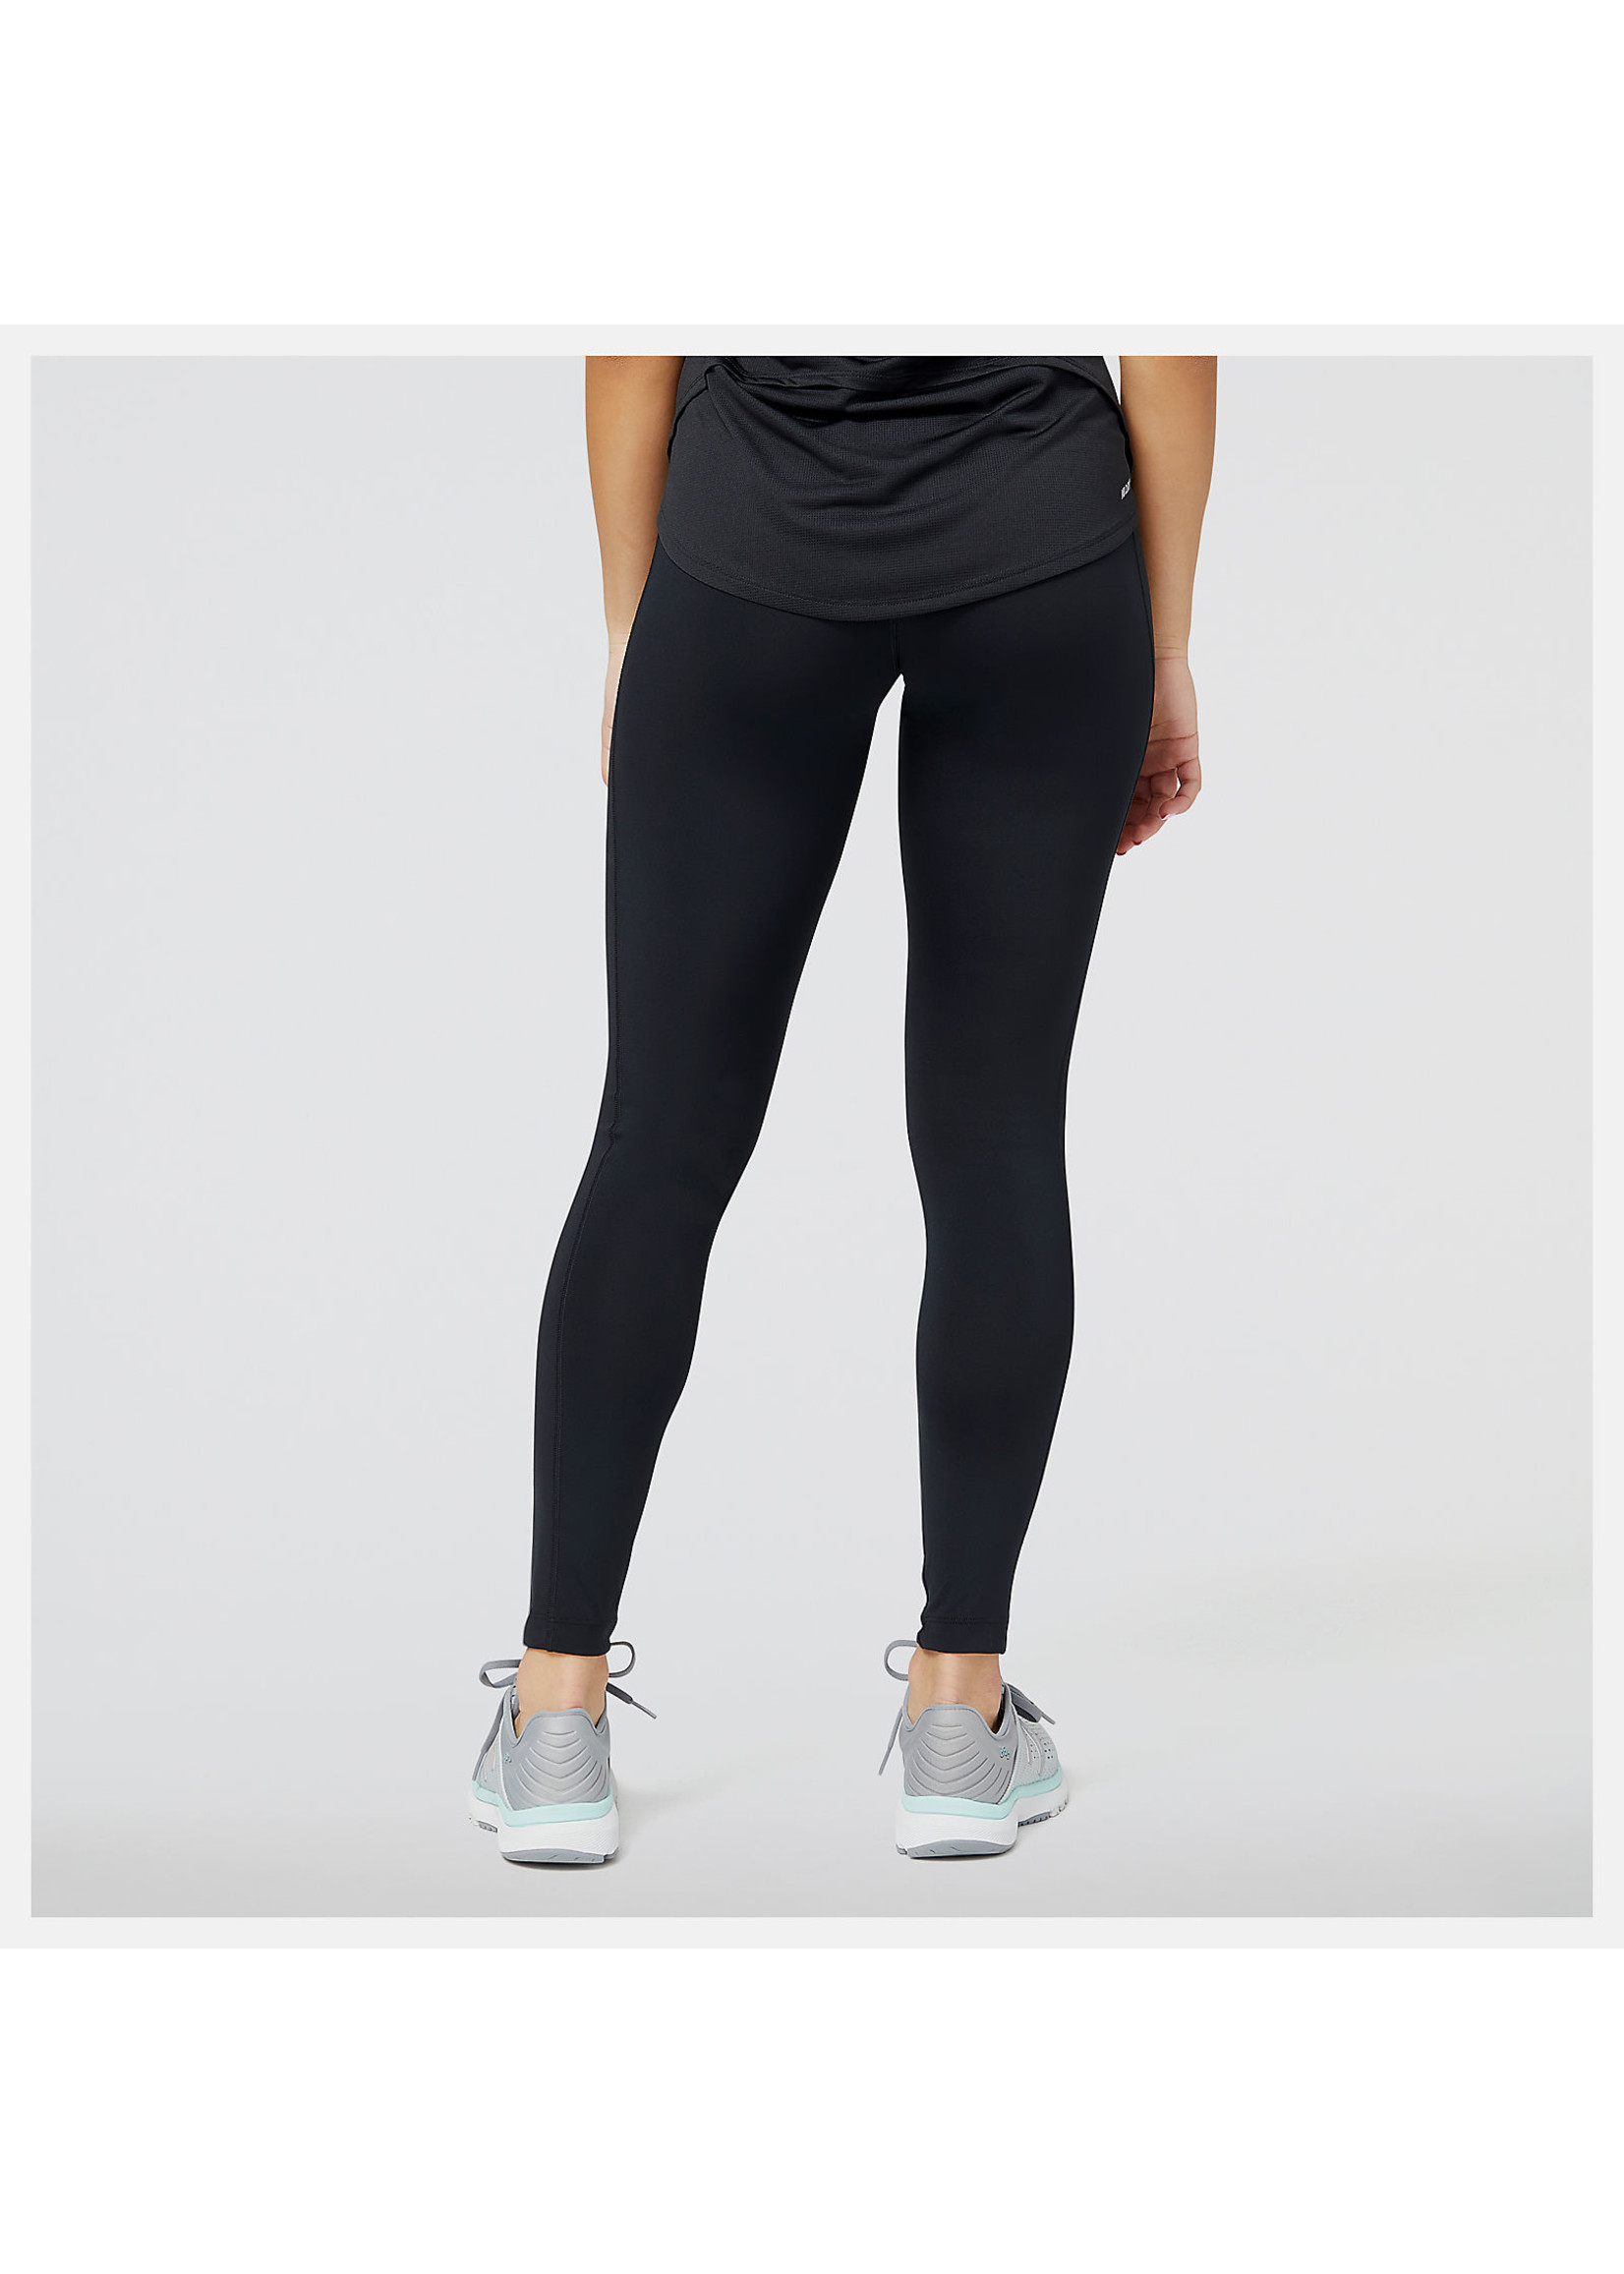 Buy Accelerate Tight online